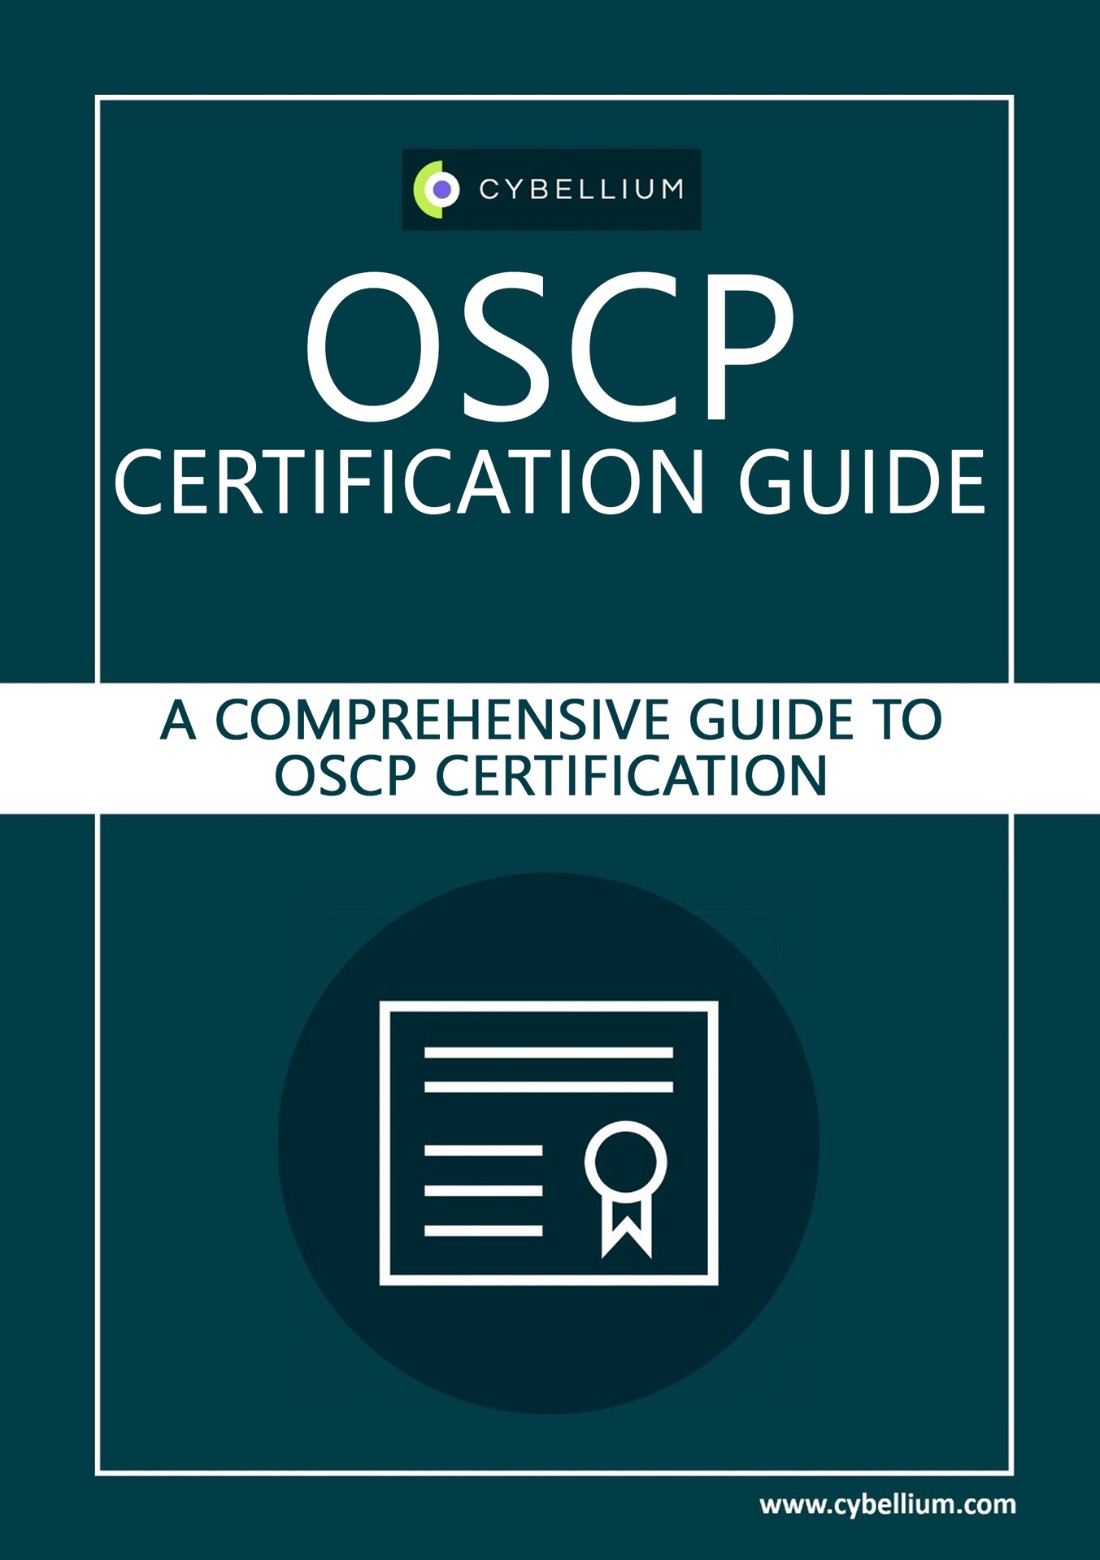 OSCP Certification Guide A Comprehensive Guide To OSCP Certification